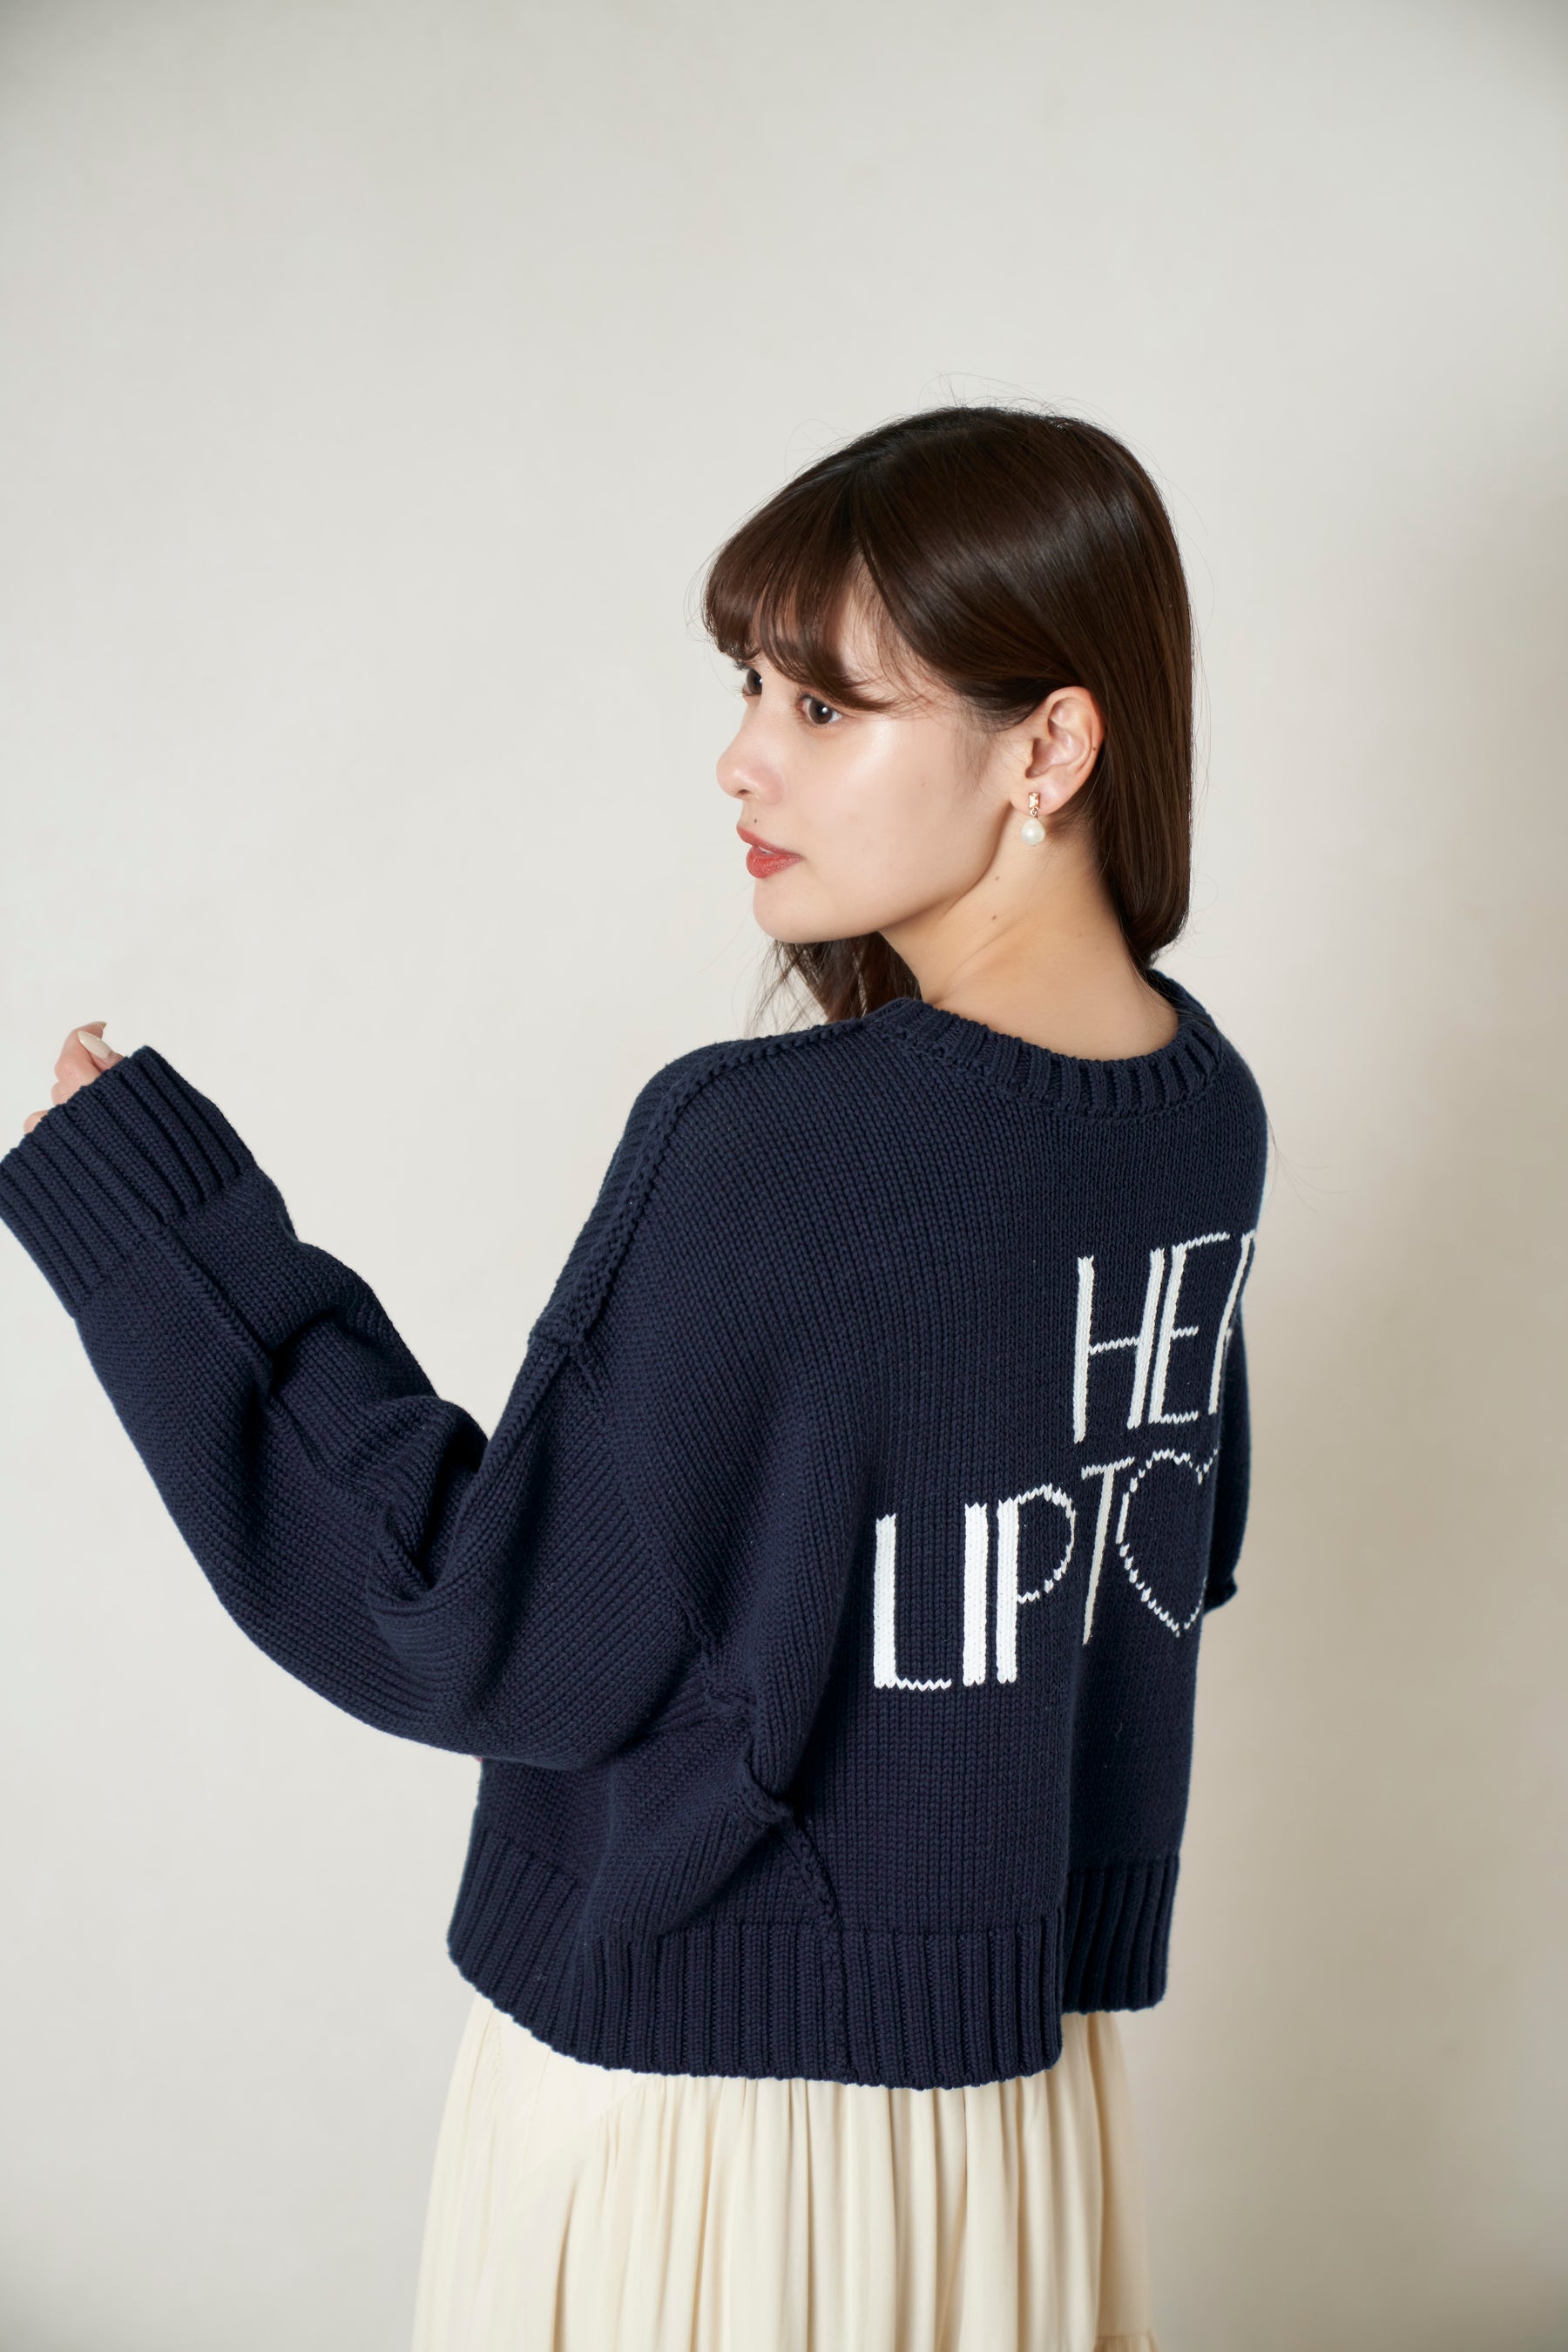 Share The Love Knit Top